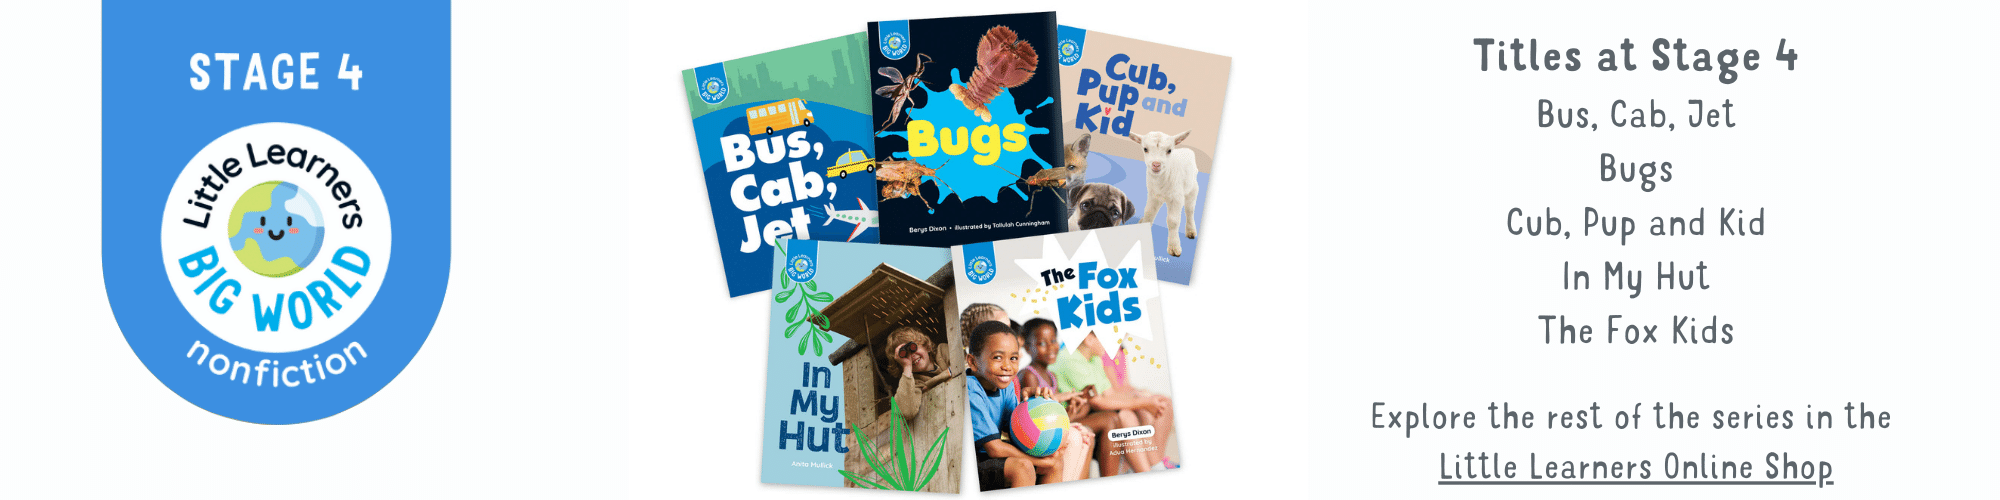 Little Learners, Big World logo and Stage 4 covers